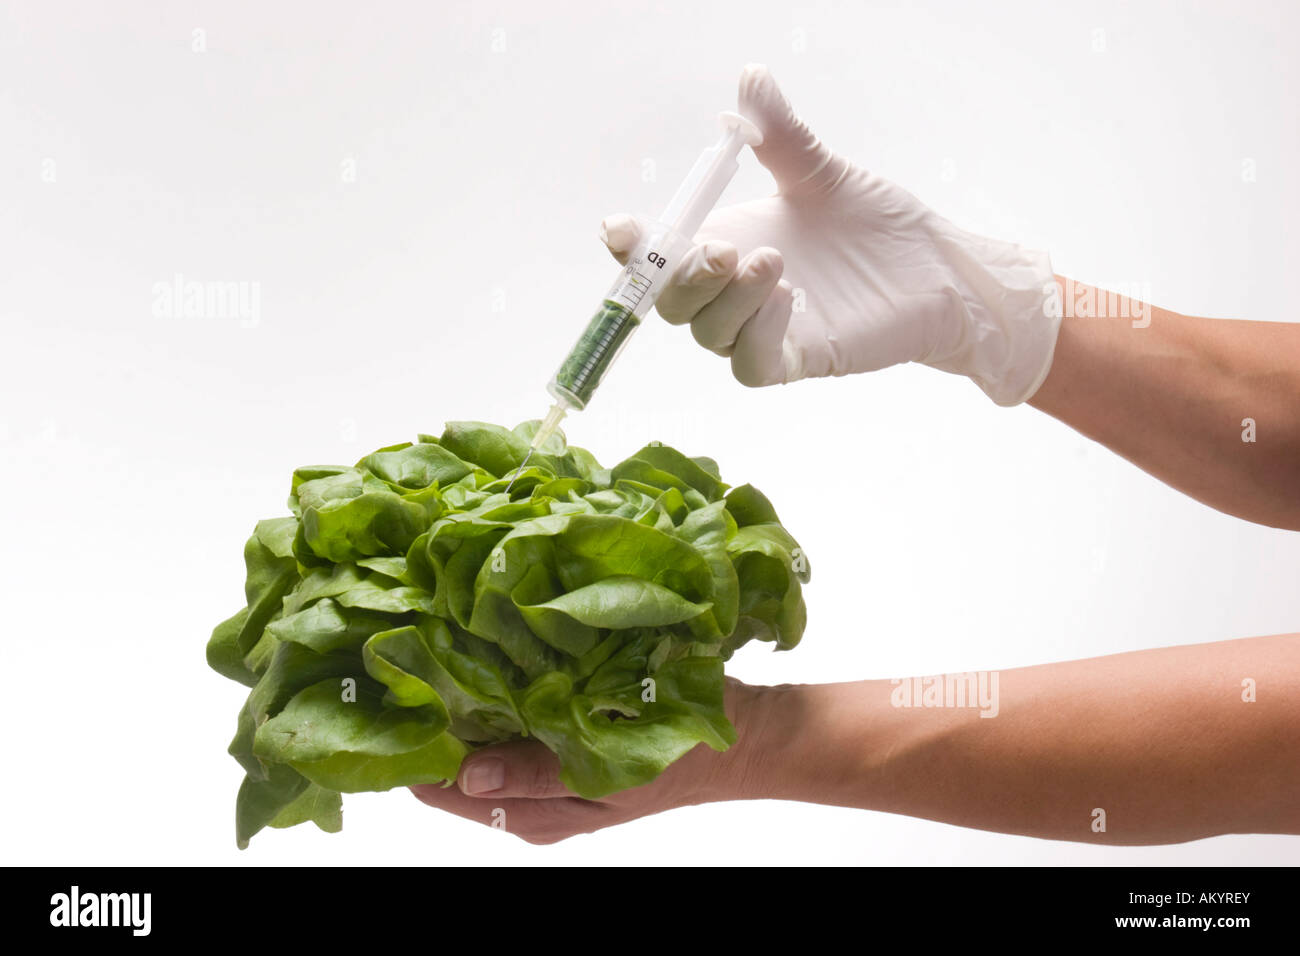 Head of lettuce getting an injection Stock Photo